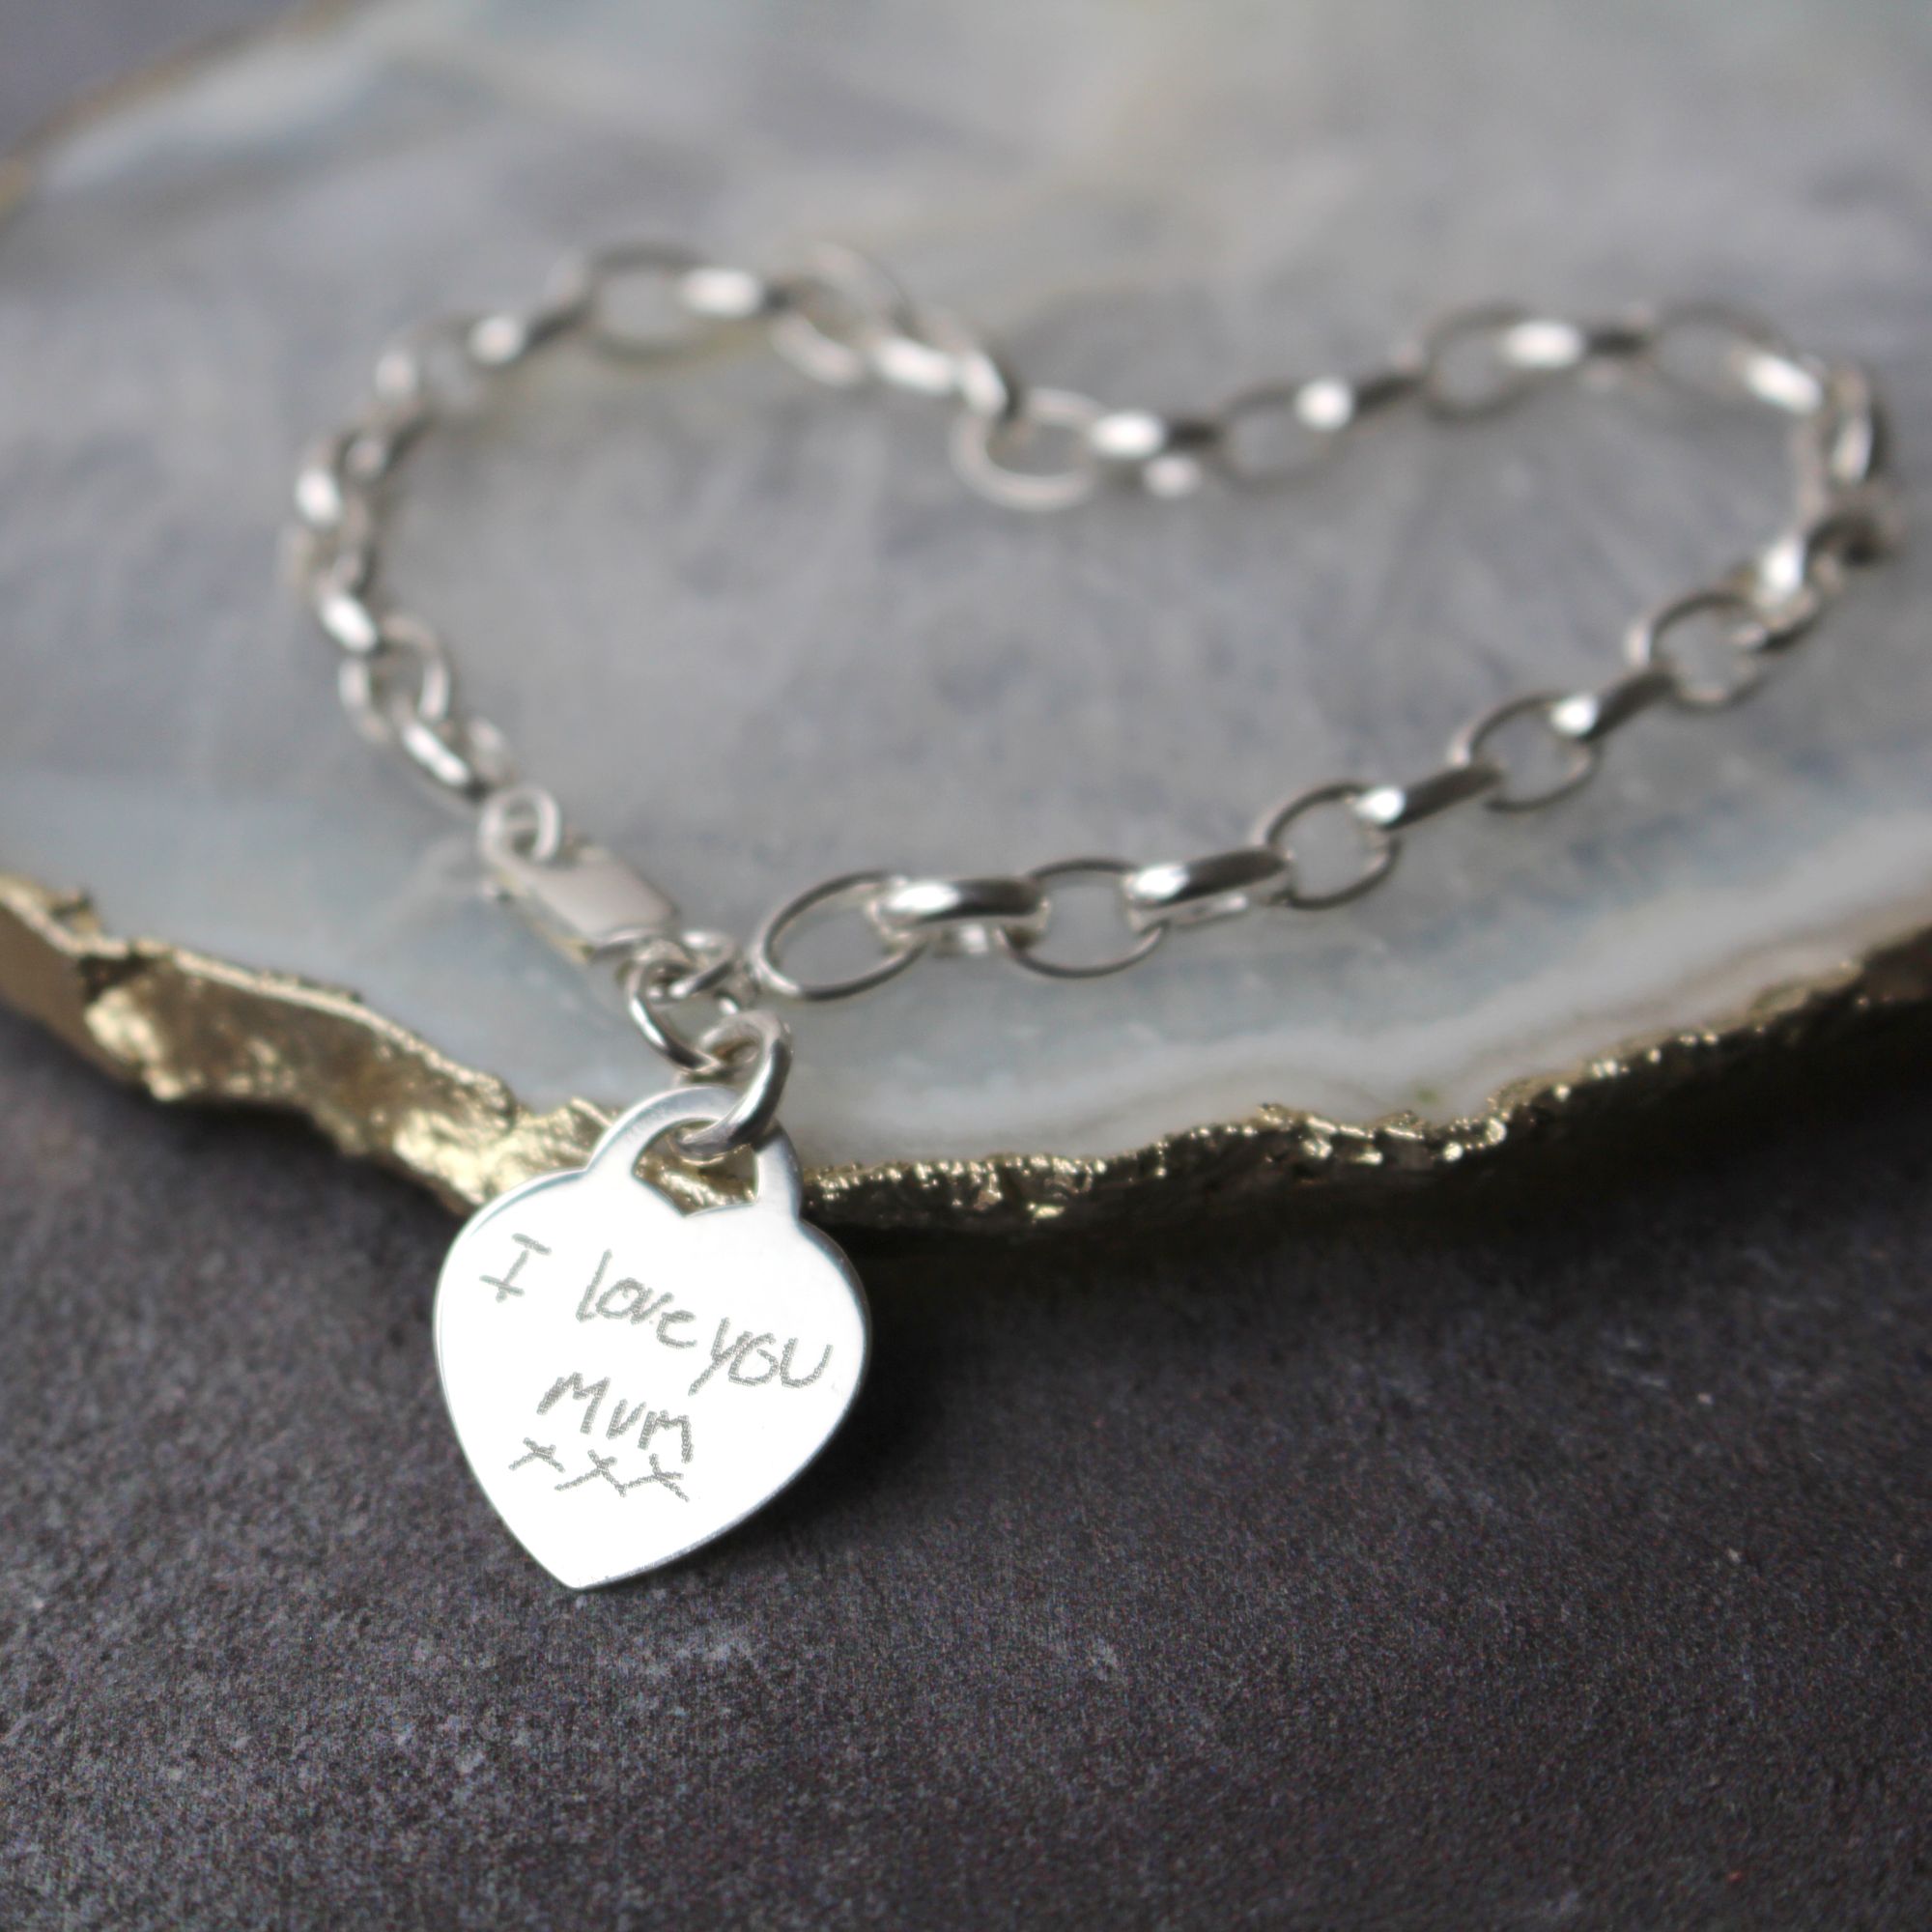 Handwrtiting engraved silver bracelet by Polly Red